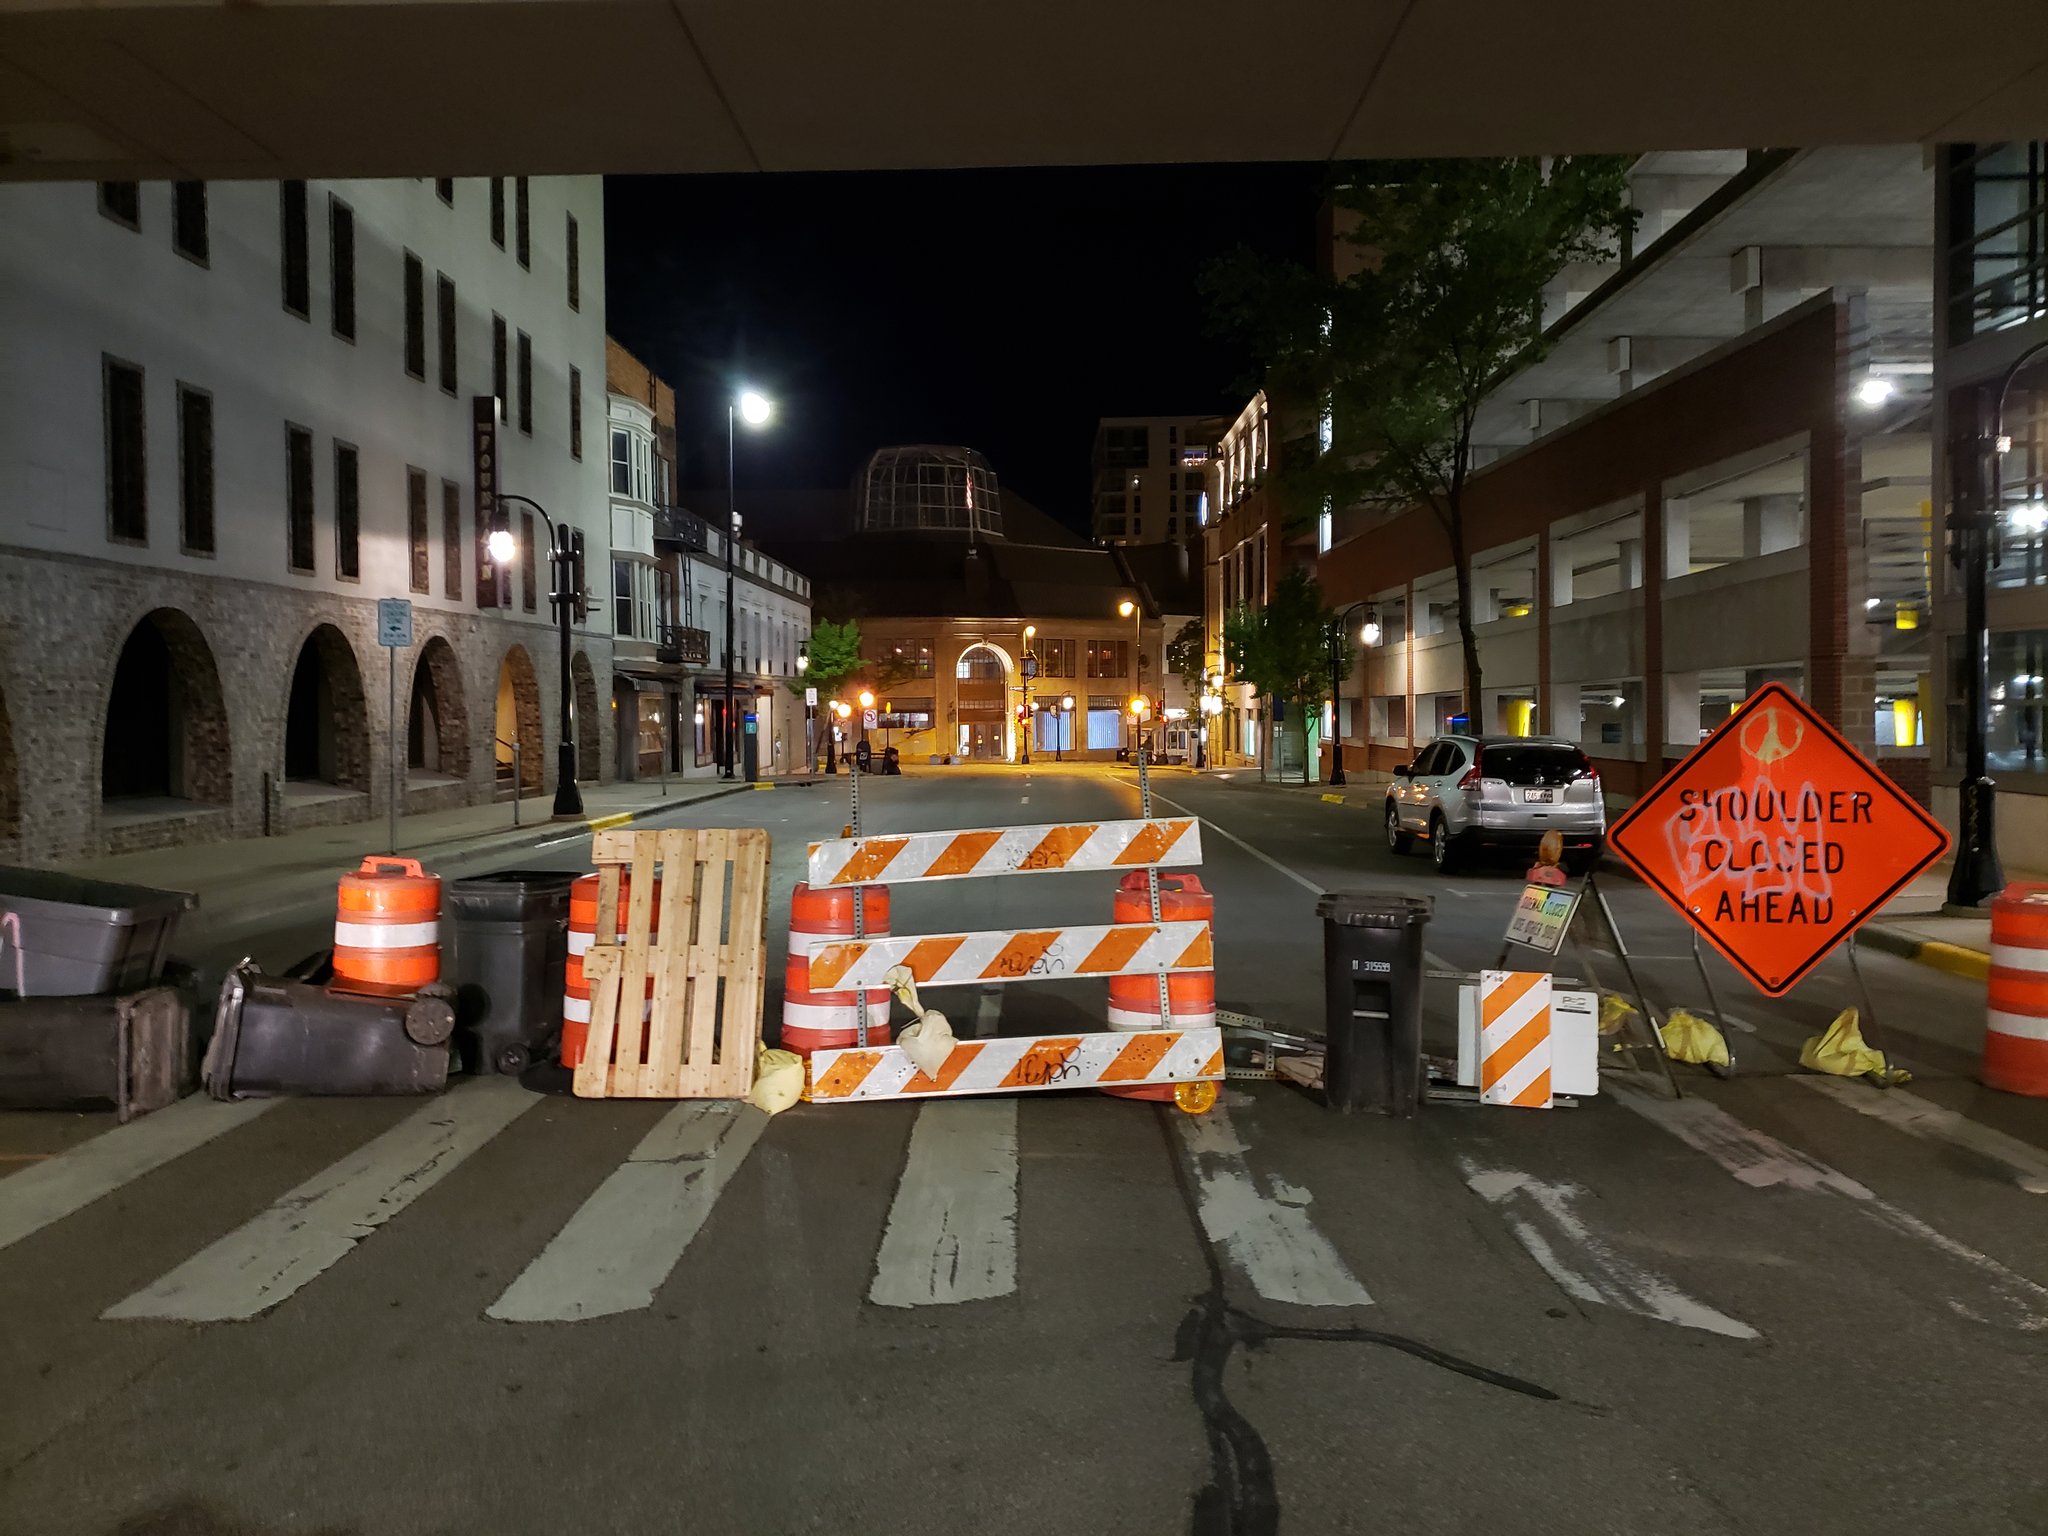 An improvised barrier on the street in Madison's downtown.